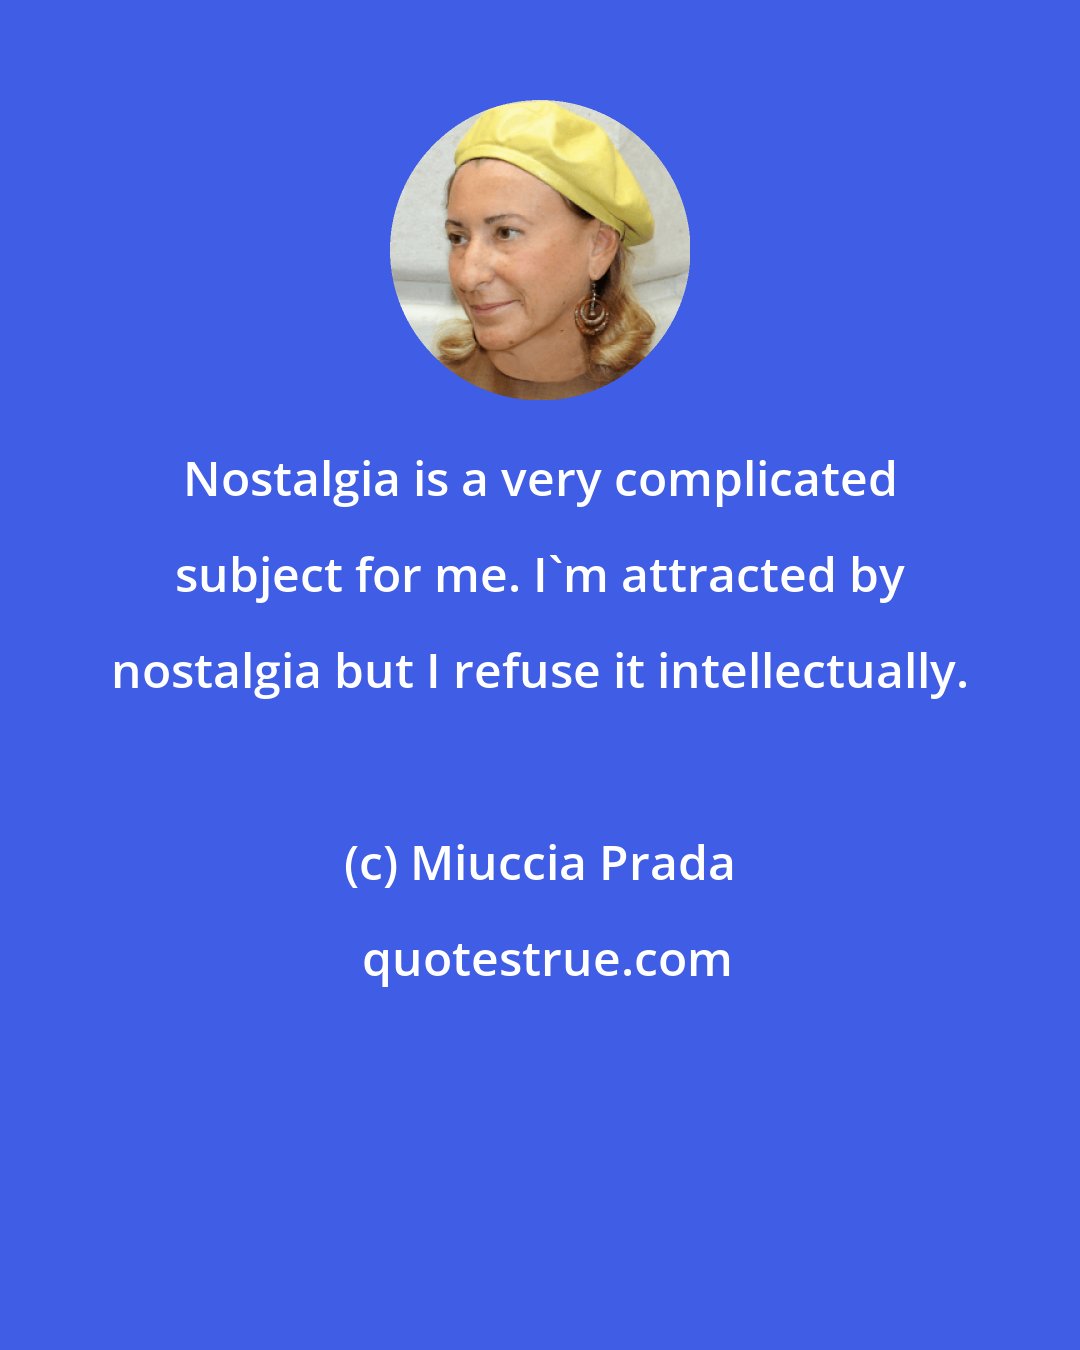 Miuccia Prada: Nostalgia is a very complicated subject for me. I'm attracted by nostalgia but I refuse it intellectually.